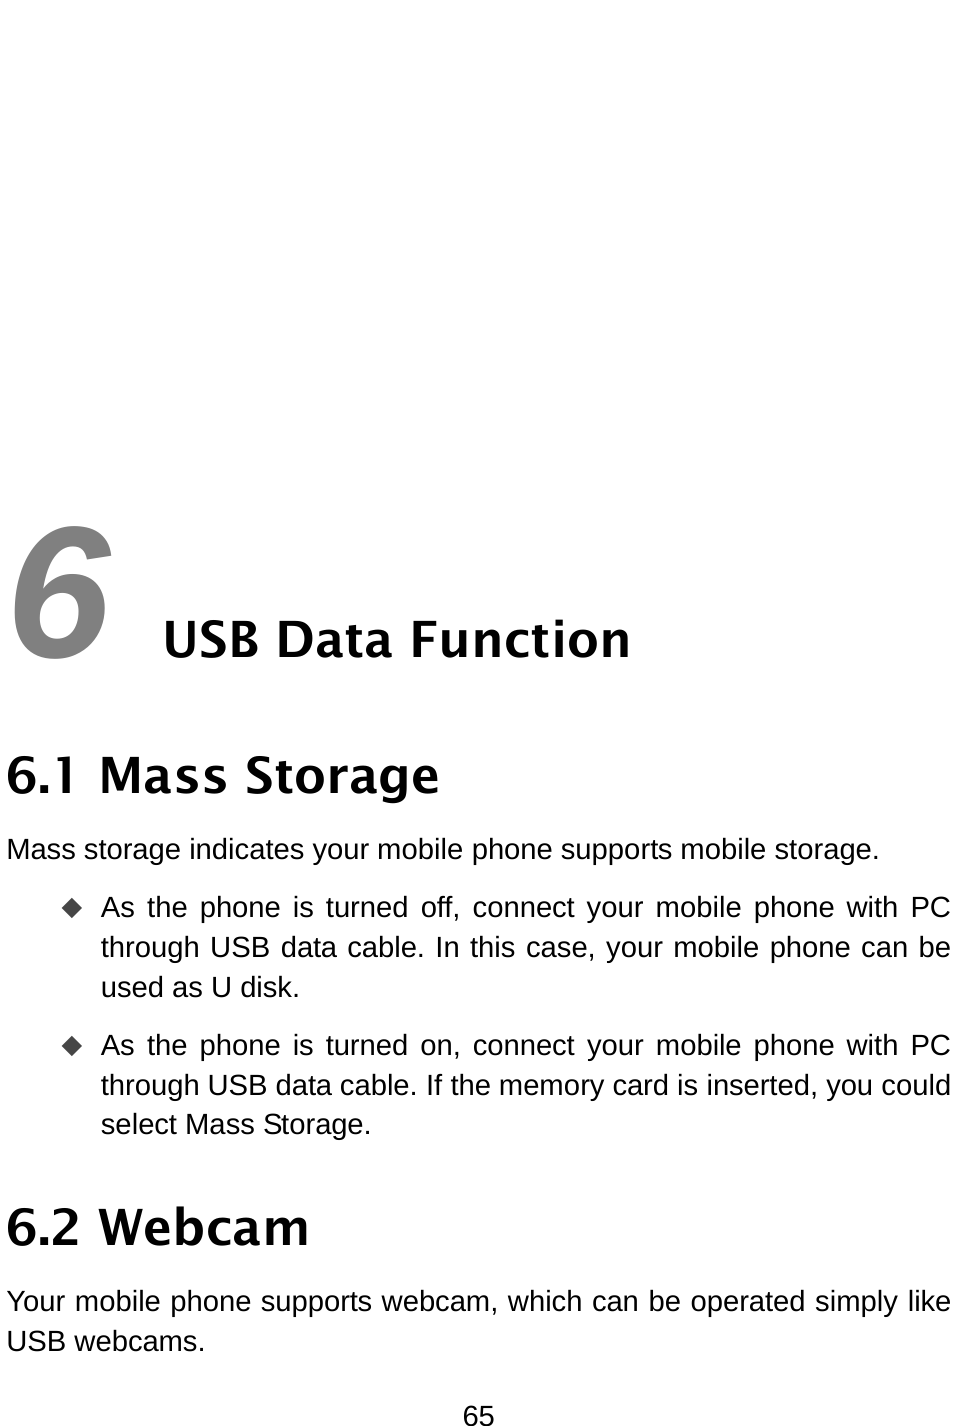  65        6 USB Data Function 6.1 Mass Storage Mass storage indicates your mobile phone supports mobile storage.  As the phone is turned off, connect your mobile phone with PC through USB data cable. In this case, your mobile phone can be used as U disk.    As the phone is turned on, connect your mobile phone with PC through USB data cable. If the memory card is inserted, you could select Mass Storage. 6.2 Webcam Your mobile phone supports webcam, which can be operated simply like USB webcams. 